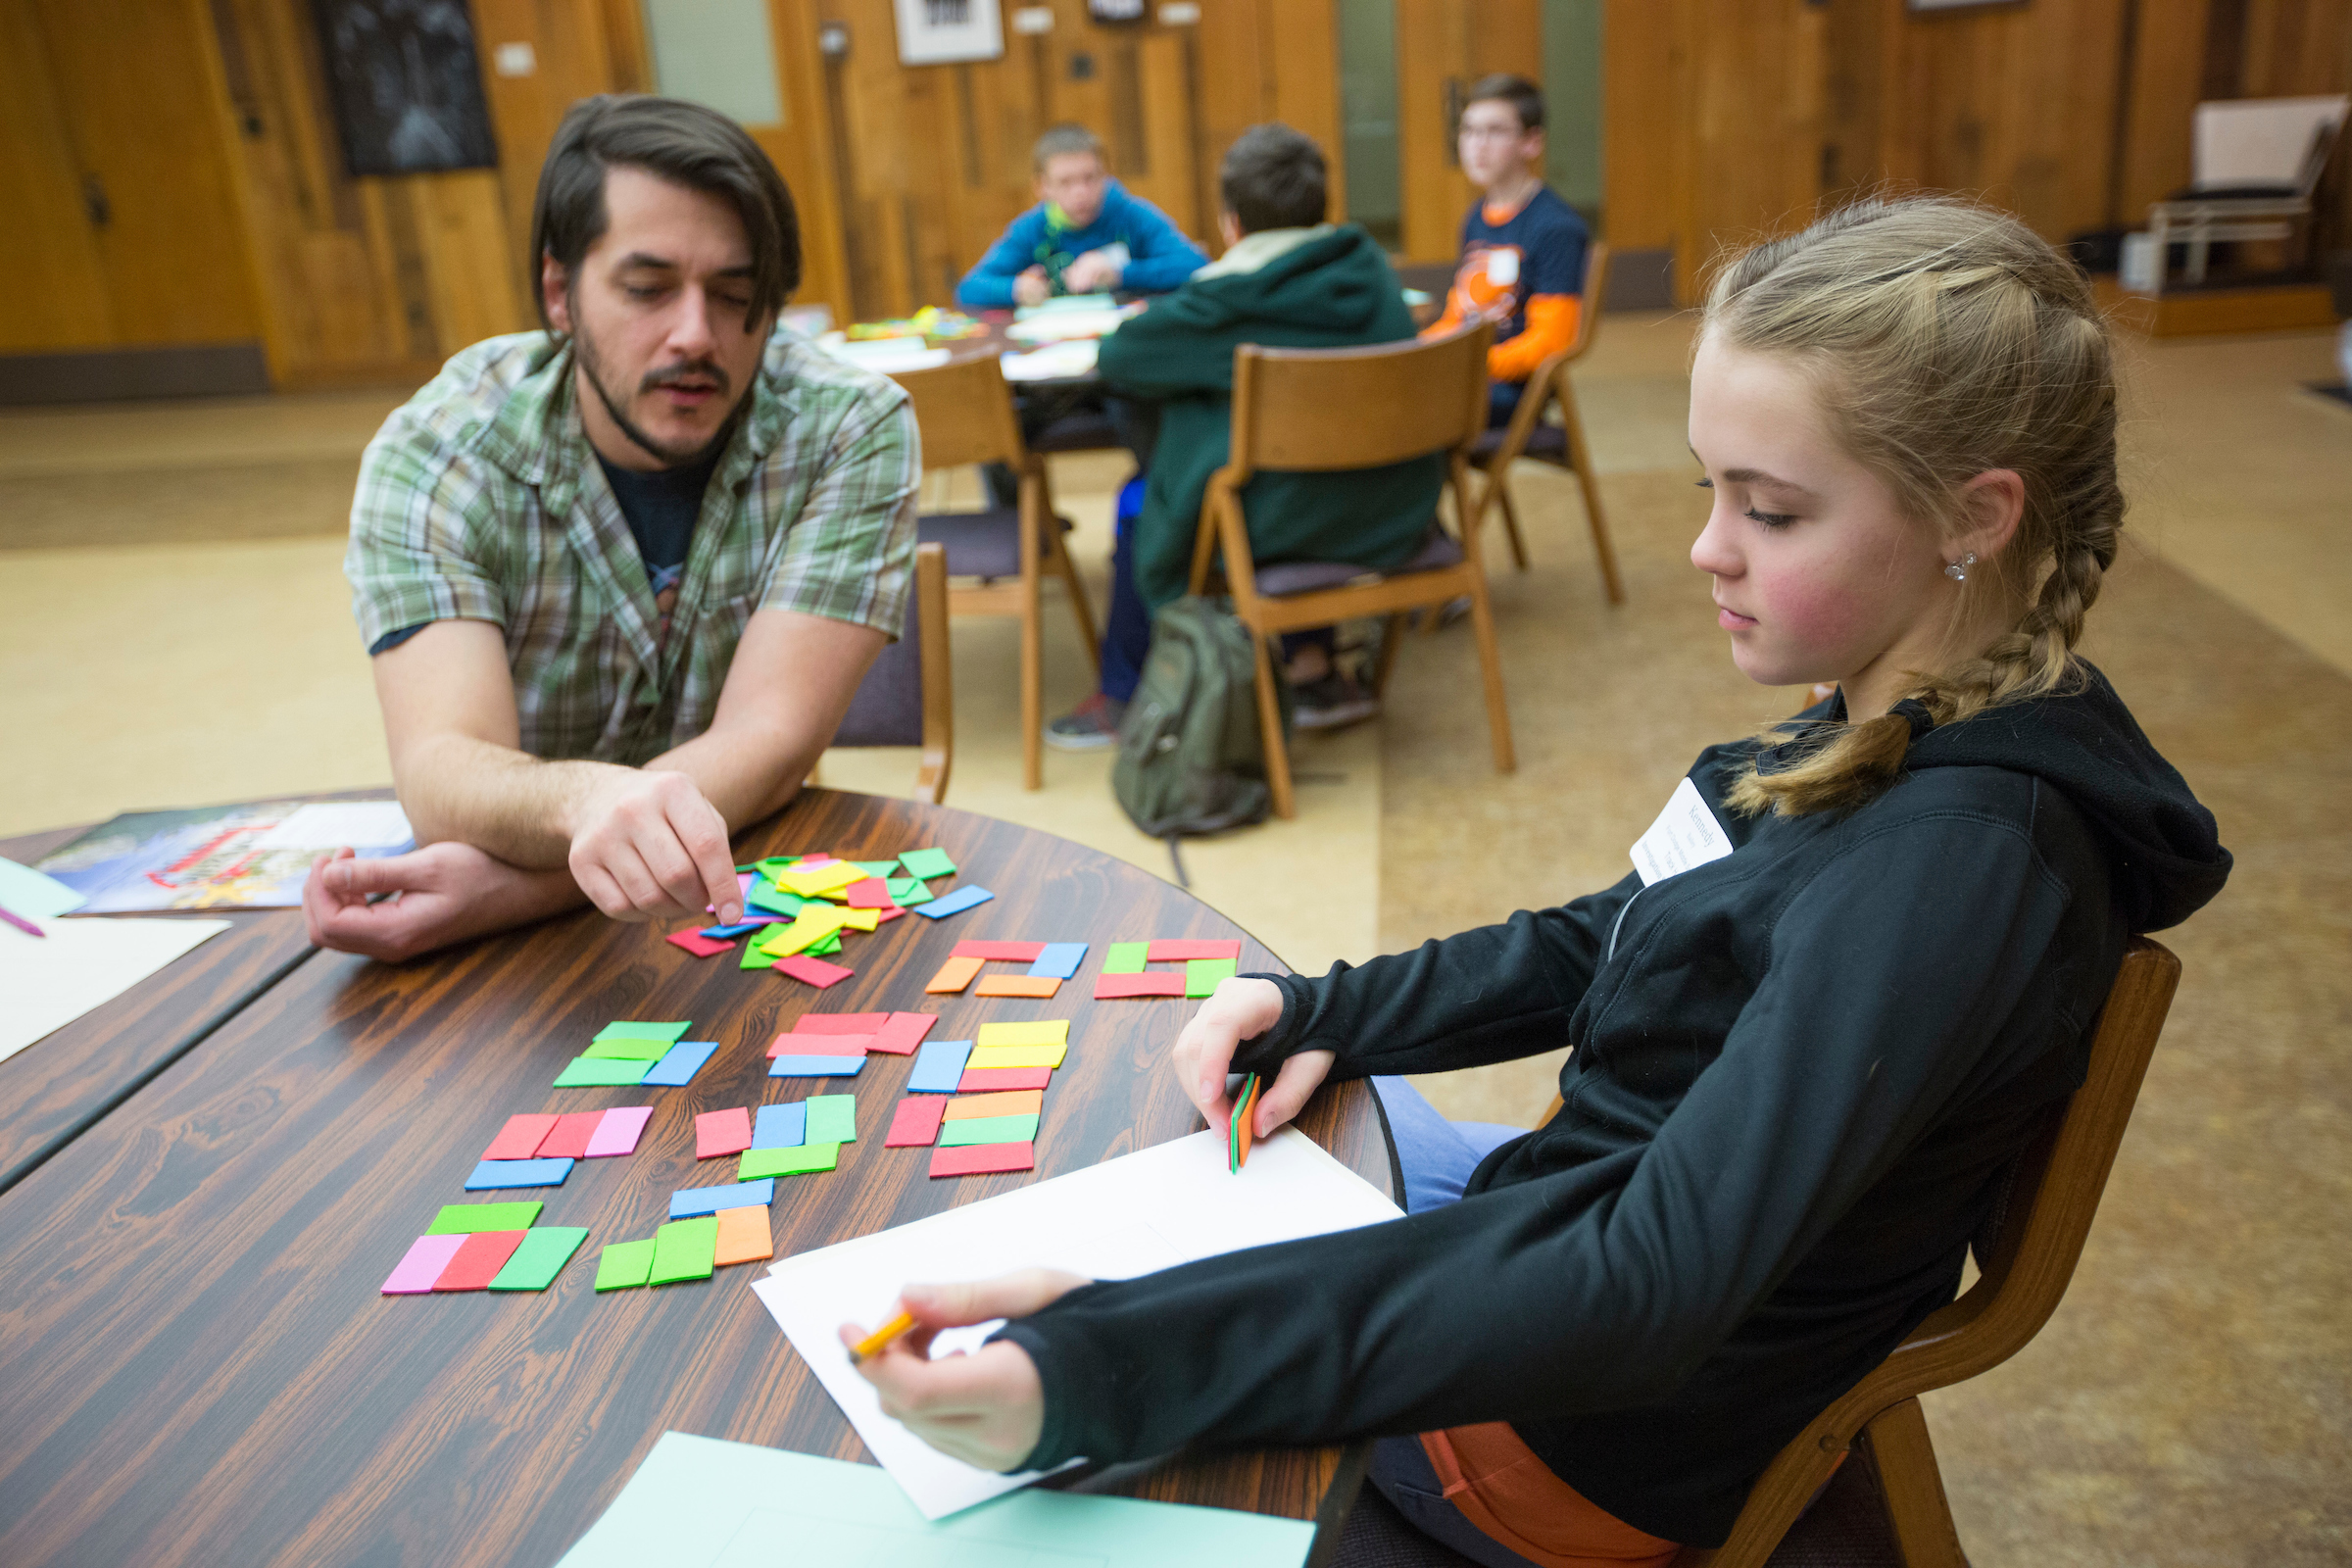 Kris Lee of the math department leads students in a tiling and pattern exercise using colorful foam tiles at a table in the Memorial Union.